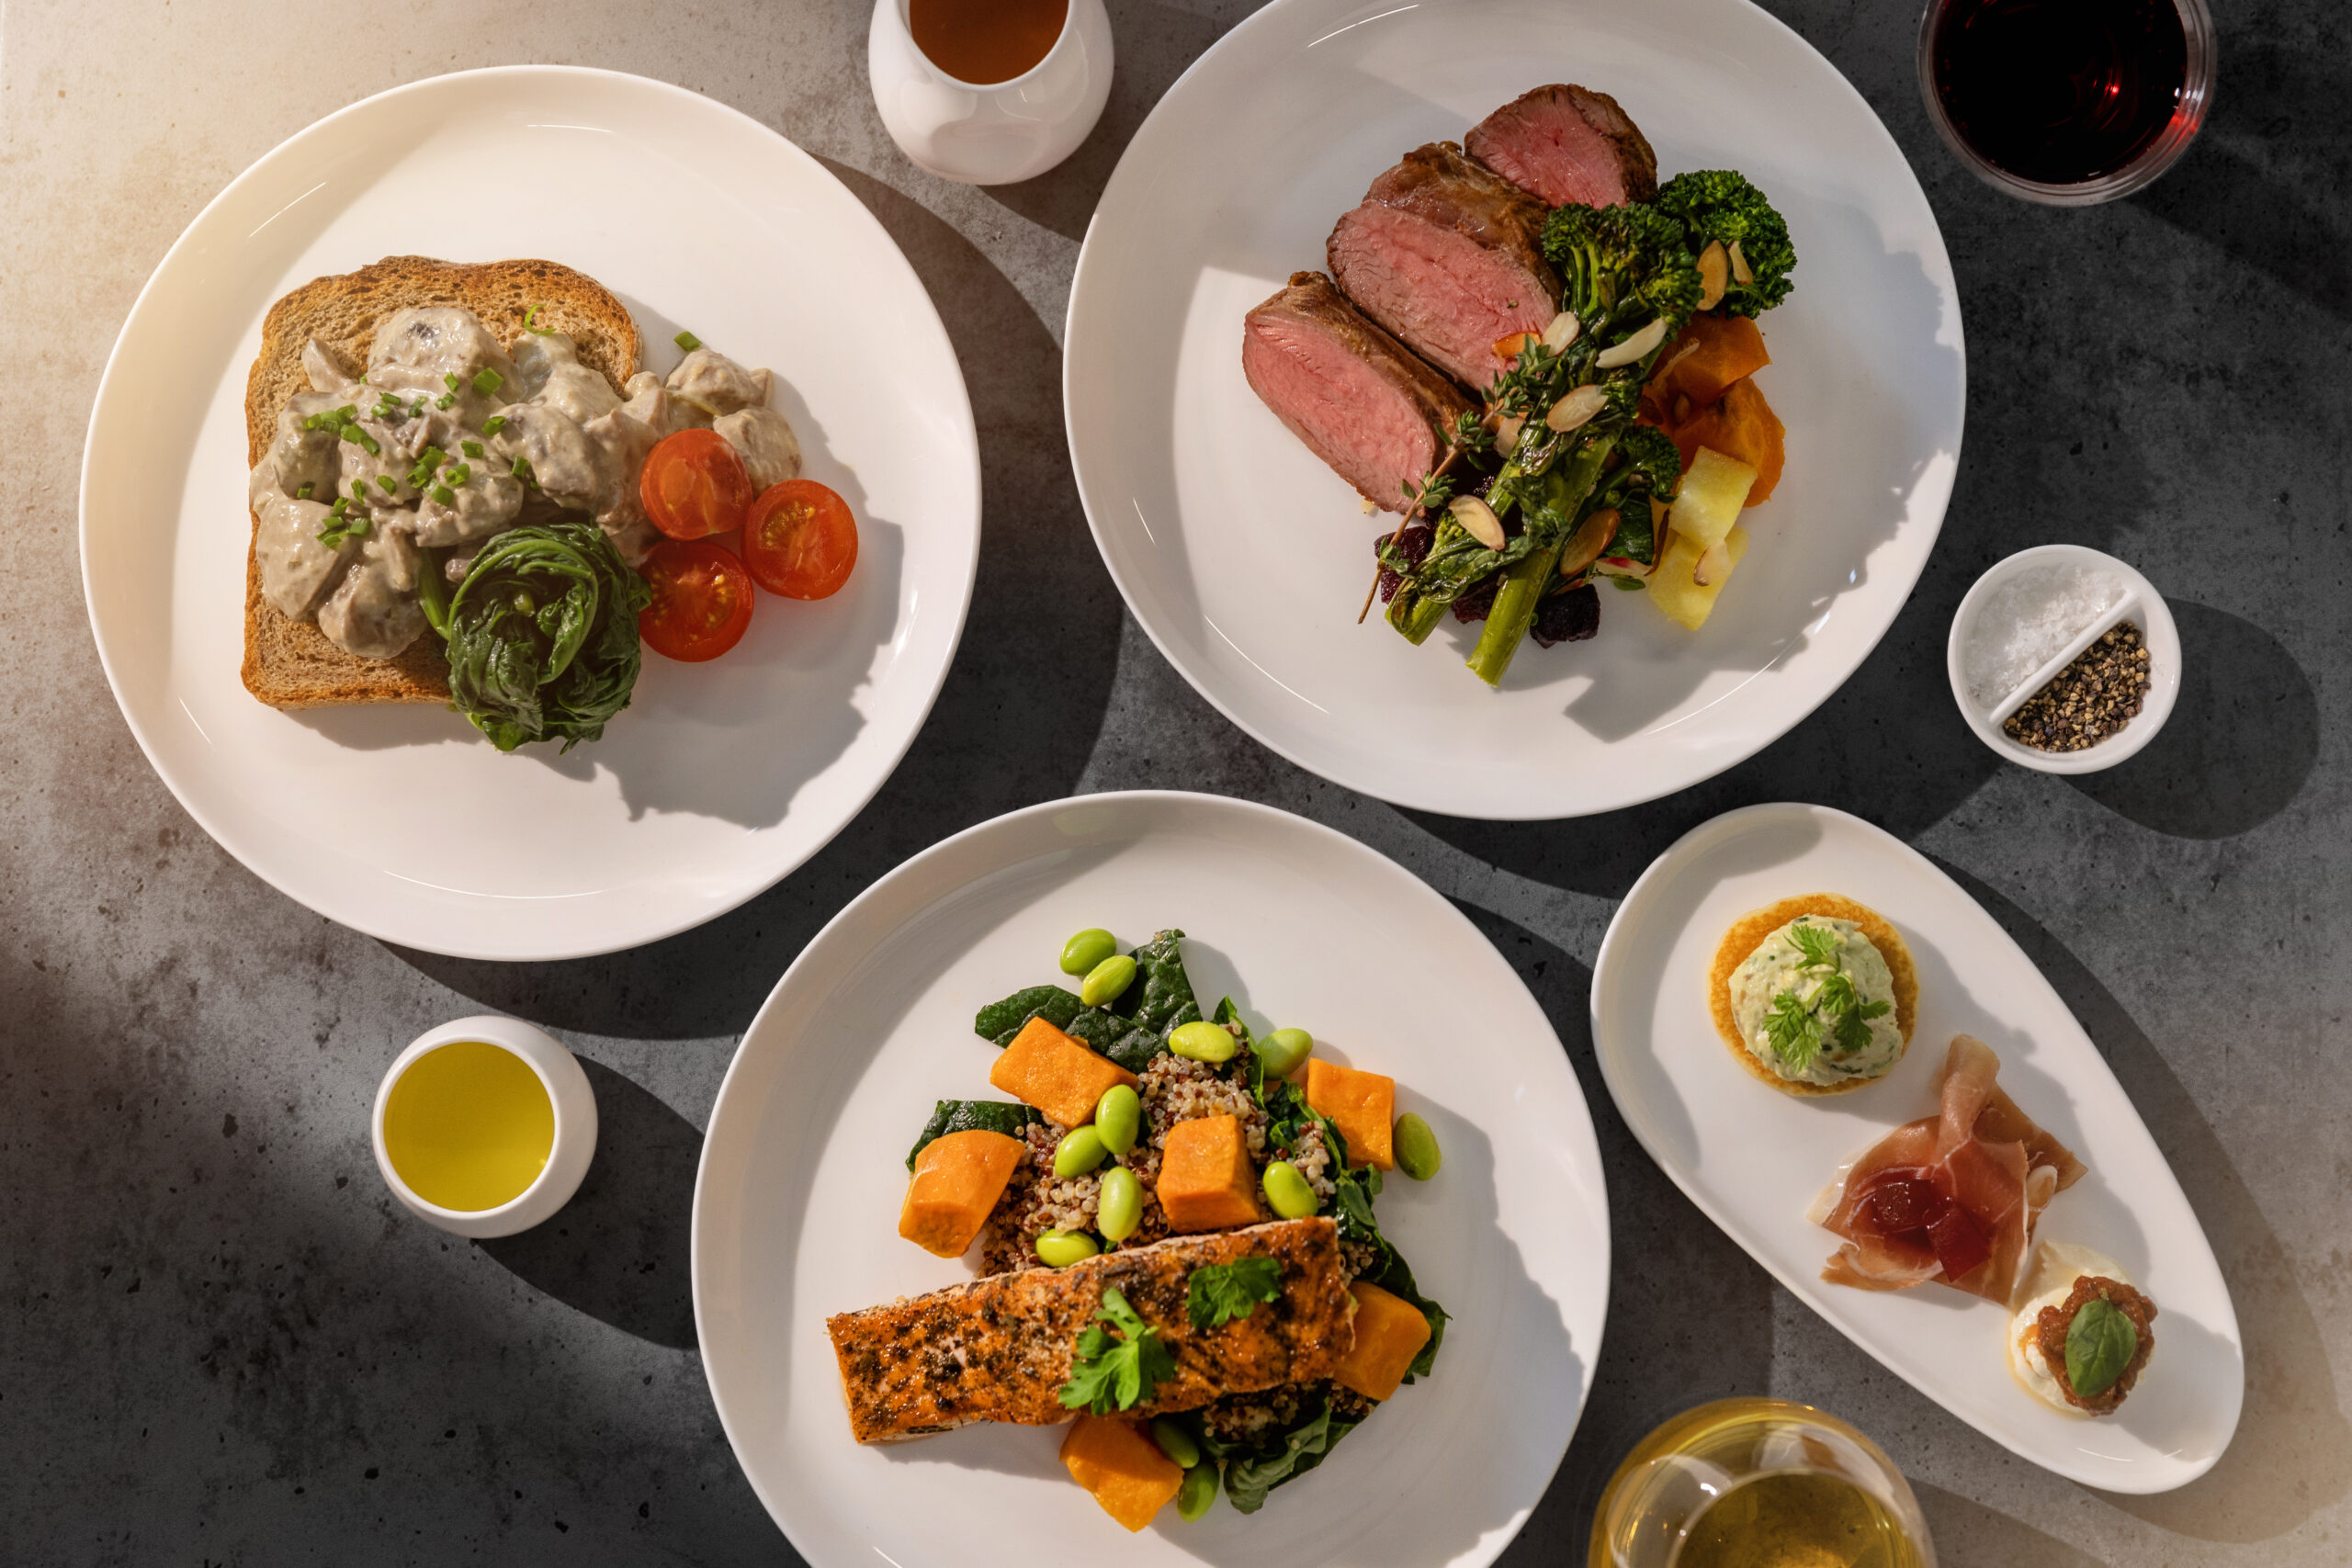 Air New Zealand Introduces New Seasonal Menu with Local Flavors